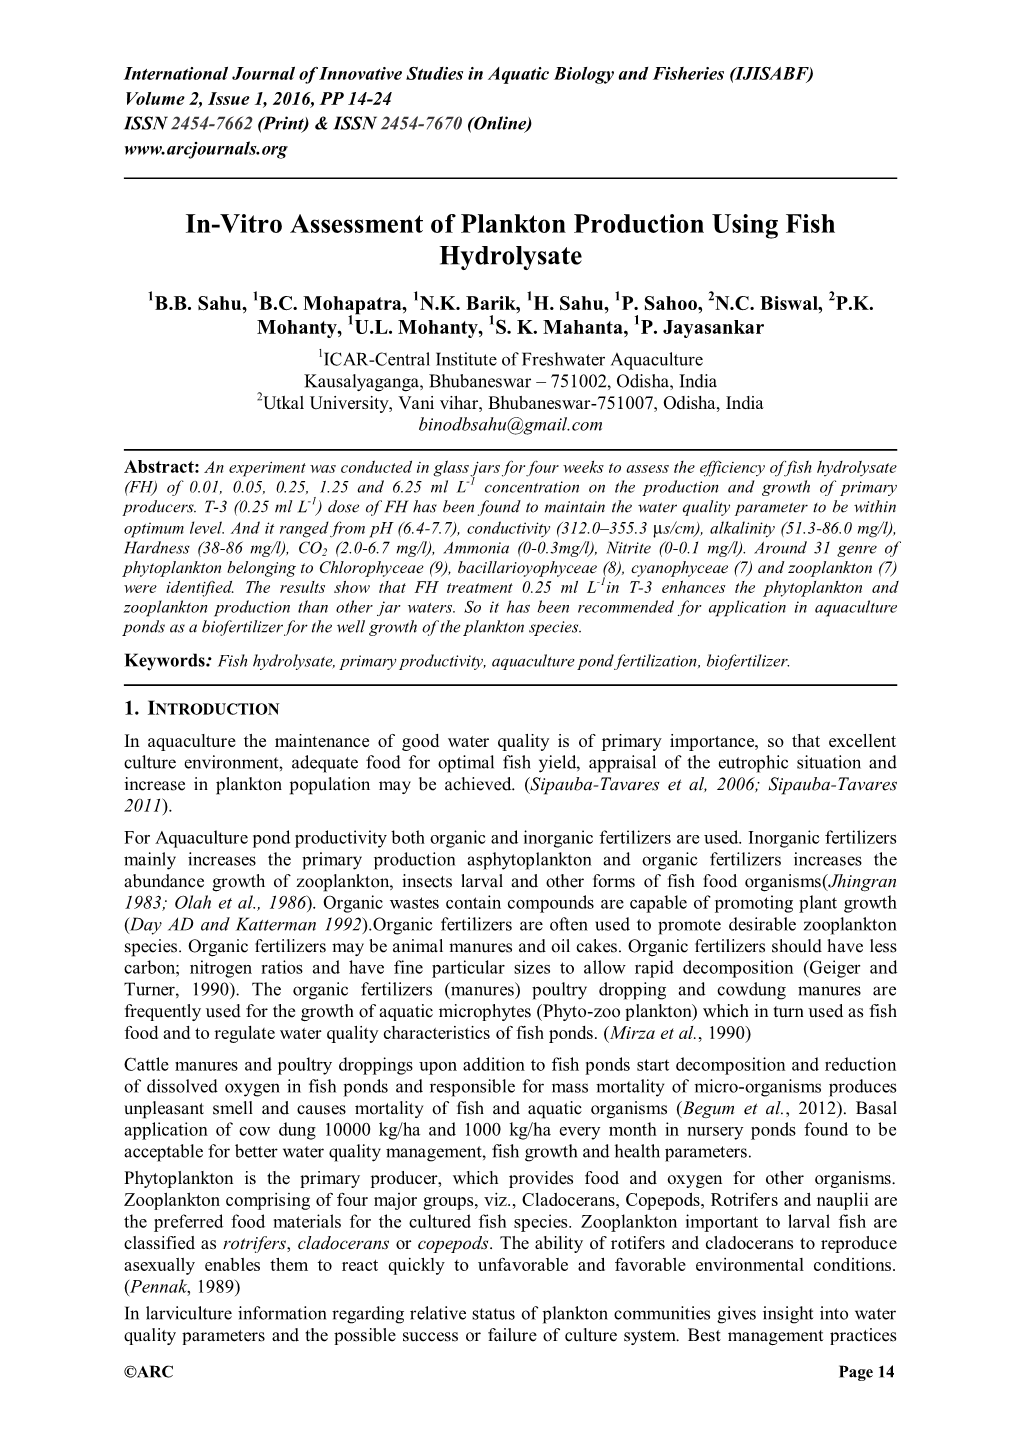 In-Vitro Assessment of Plankton Production Using Fish Hydrolysate